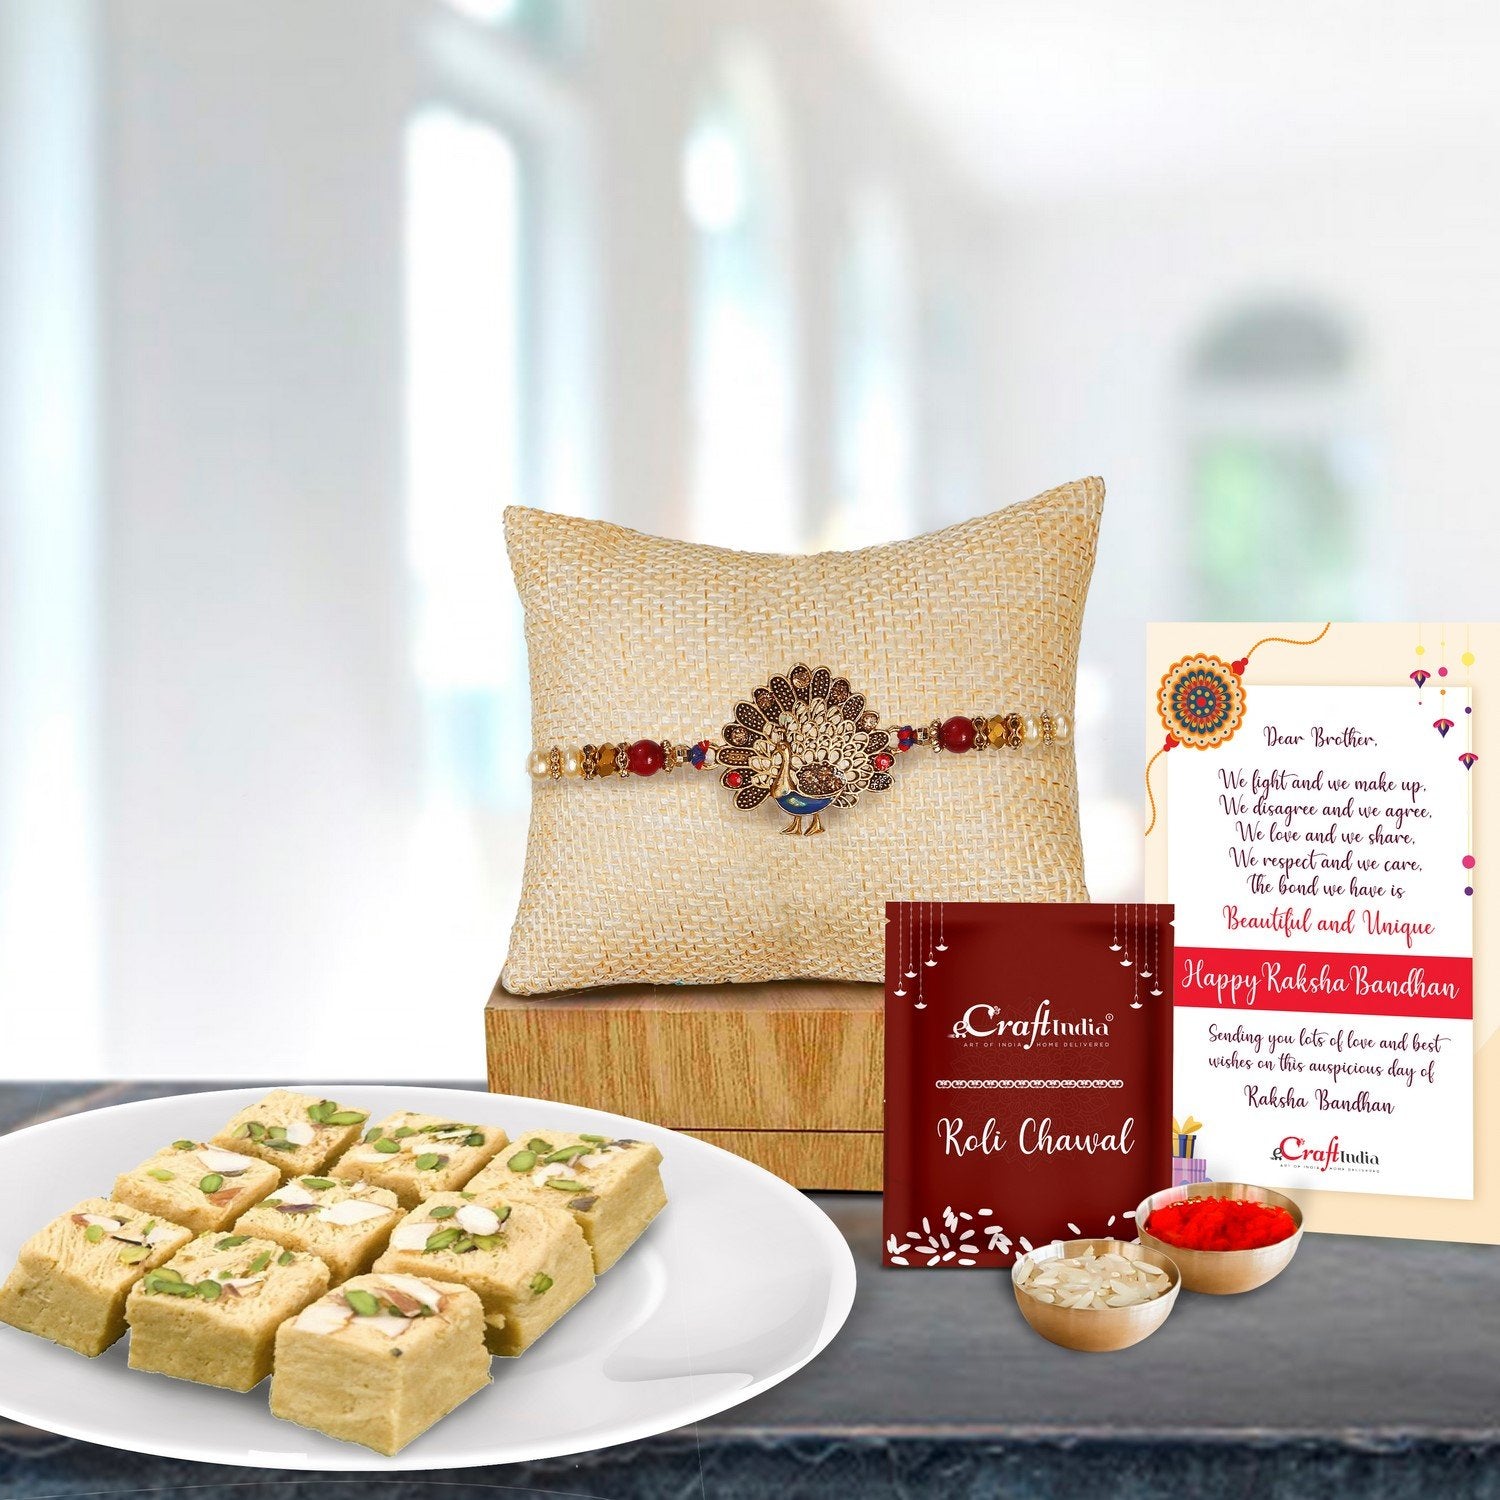 Designer Dancing Peacock Rakhi with Soan Papdi (500 Gm) and Roli Chawal Pack, Best Wishes Greeting Card